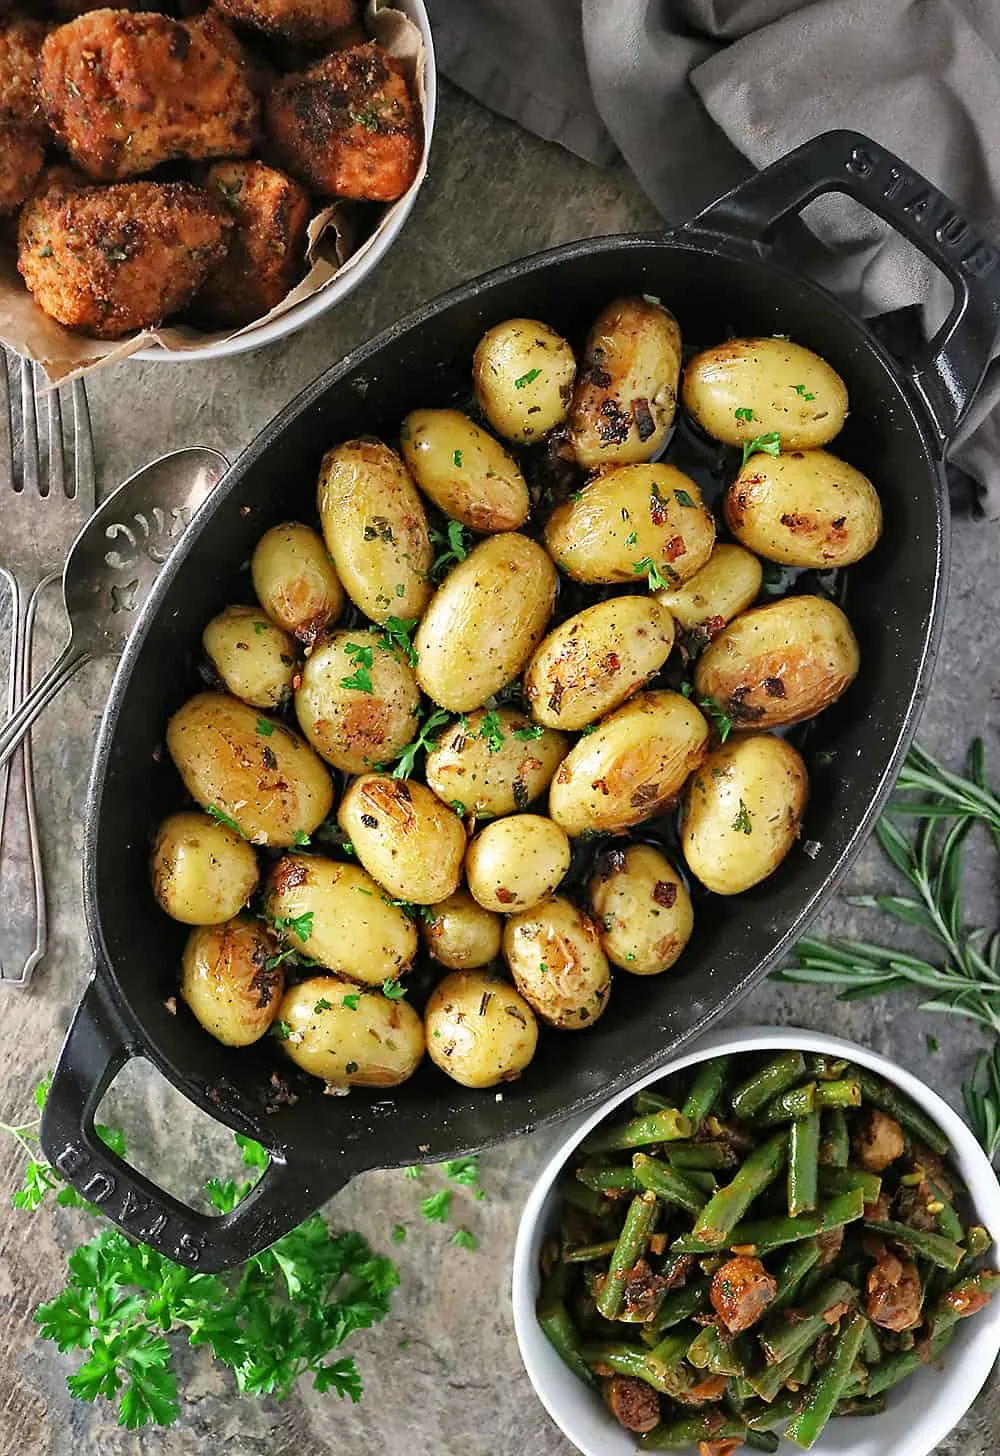 Cast-iron herb garlic potatoes, beans and sausage and fried baked chicken photo